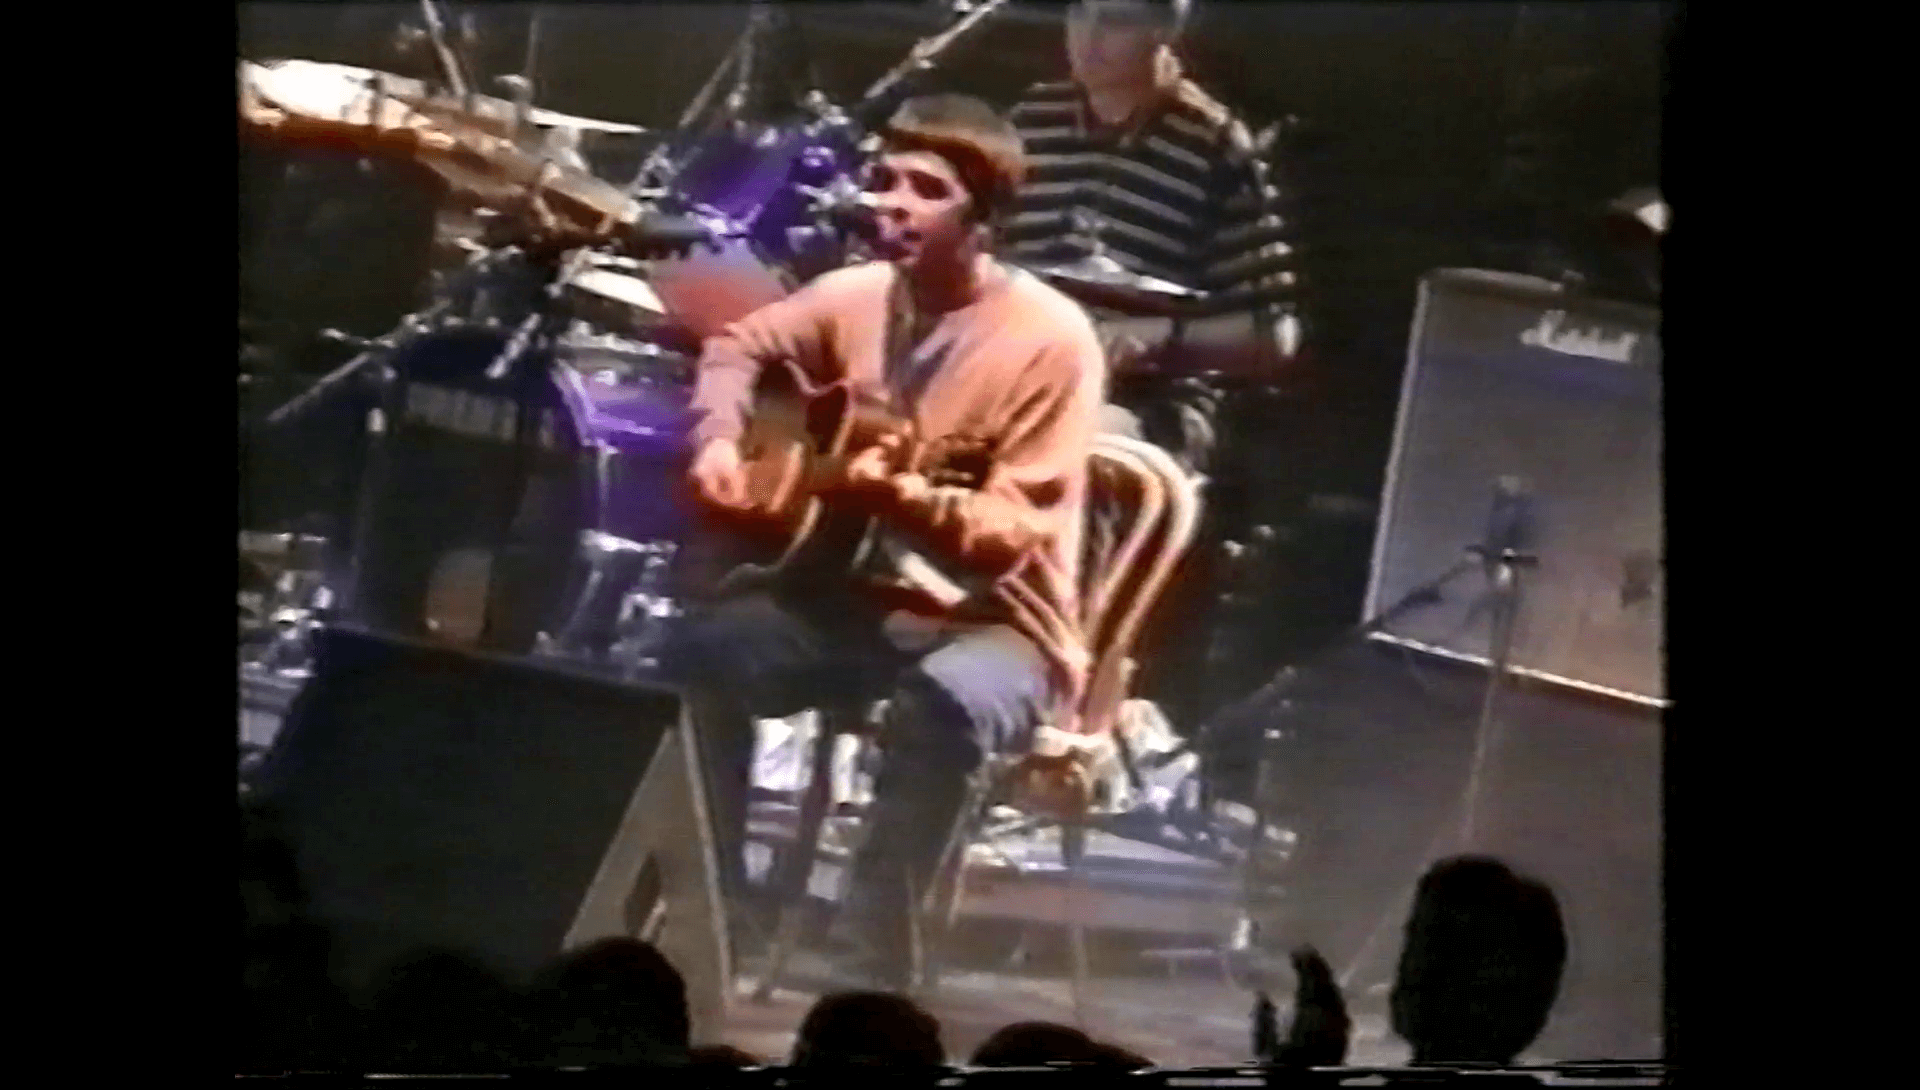 Noel Gallagher at Brixton Academy, London - May 17, 1997